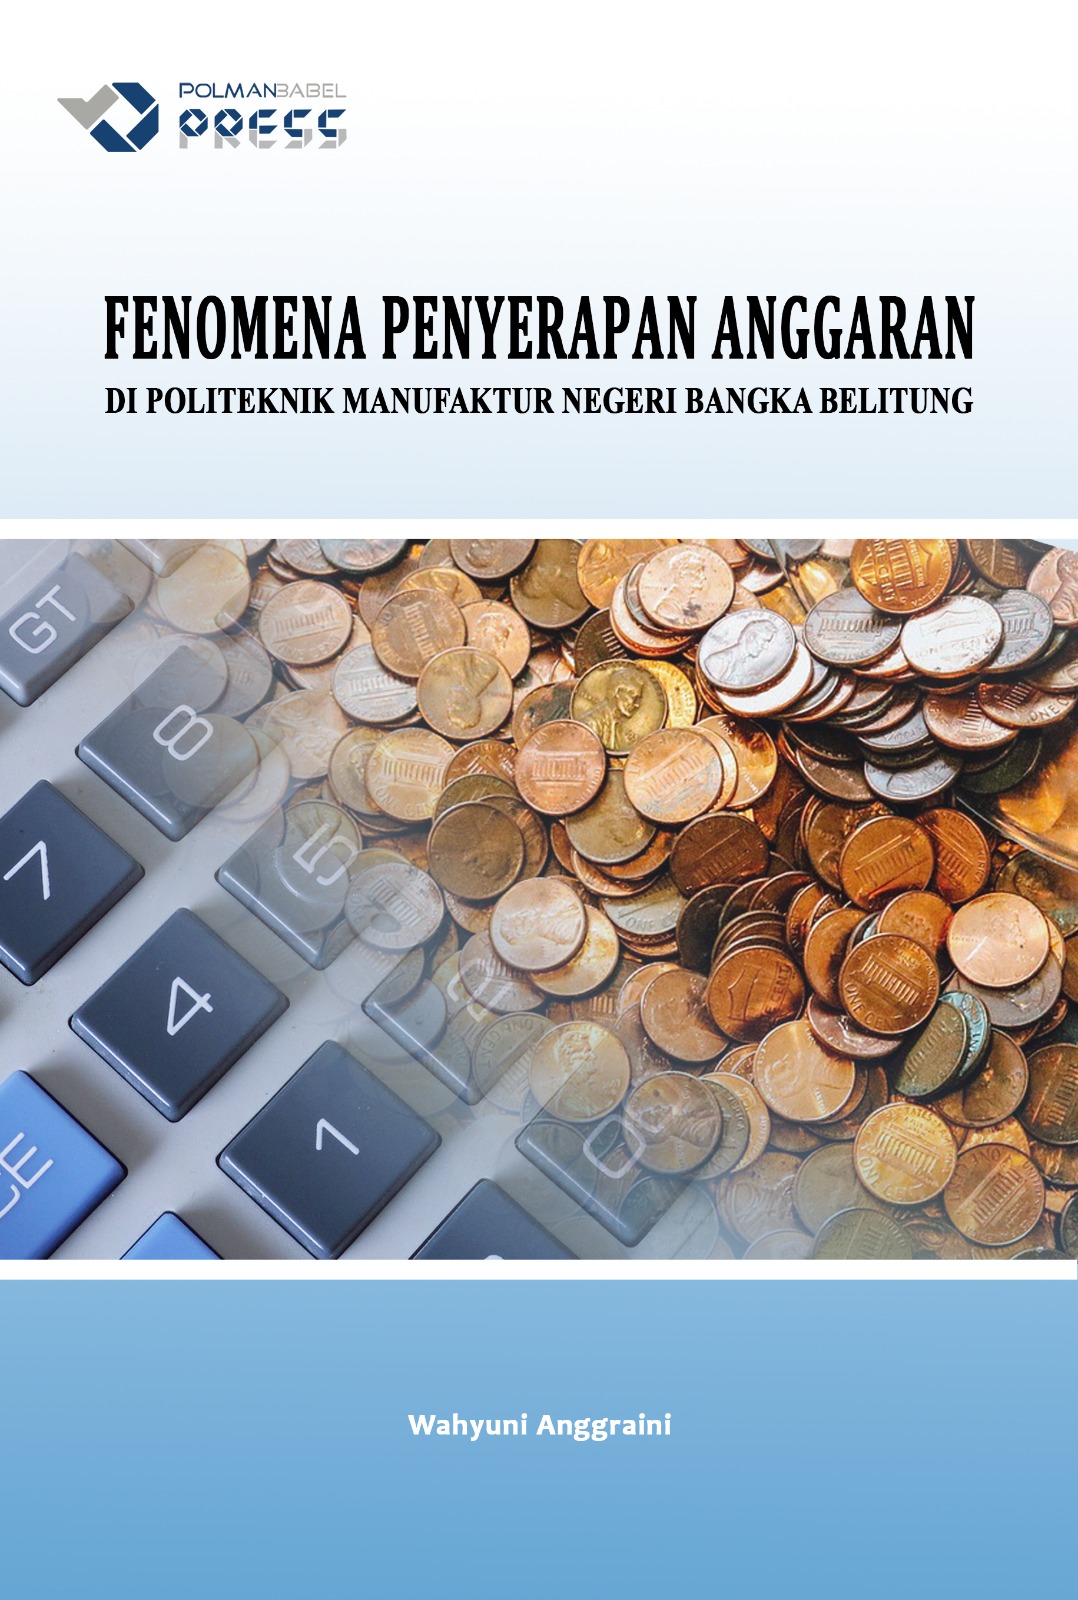 The Phenomenon of Budget Absorption at the Bangka Belitung State Manufacturing Polytechnic